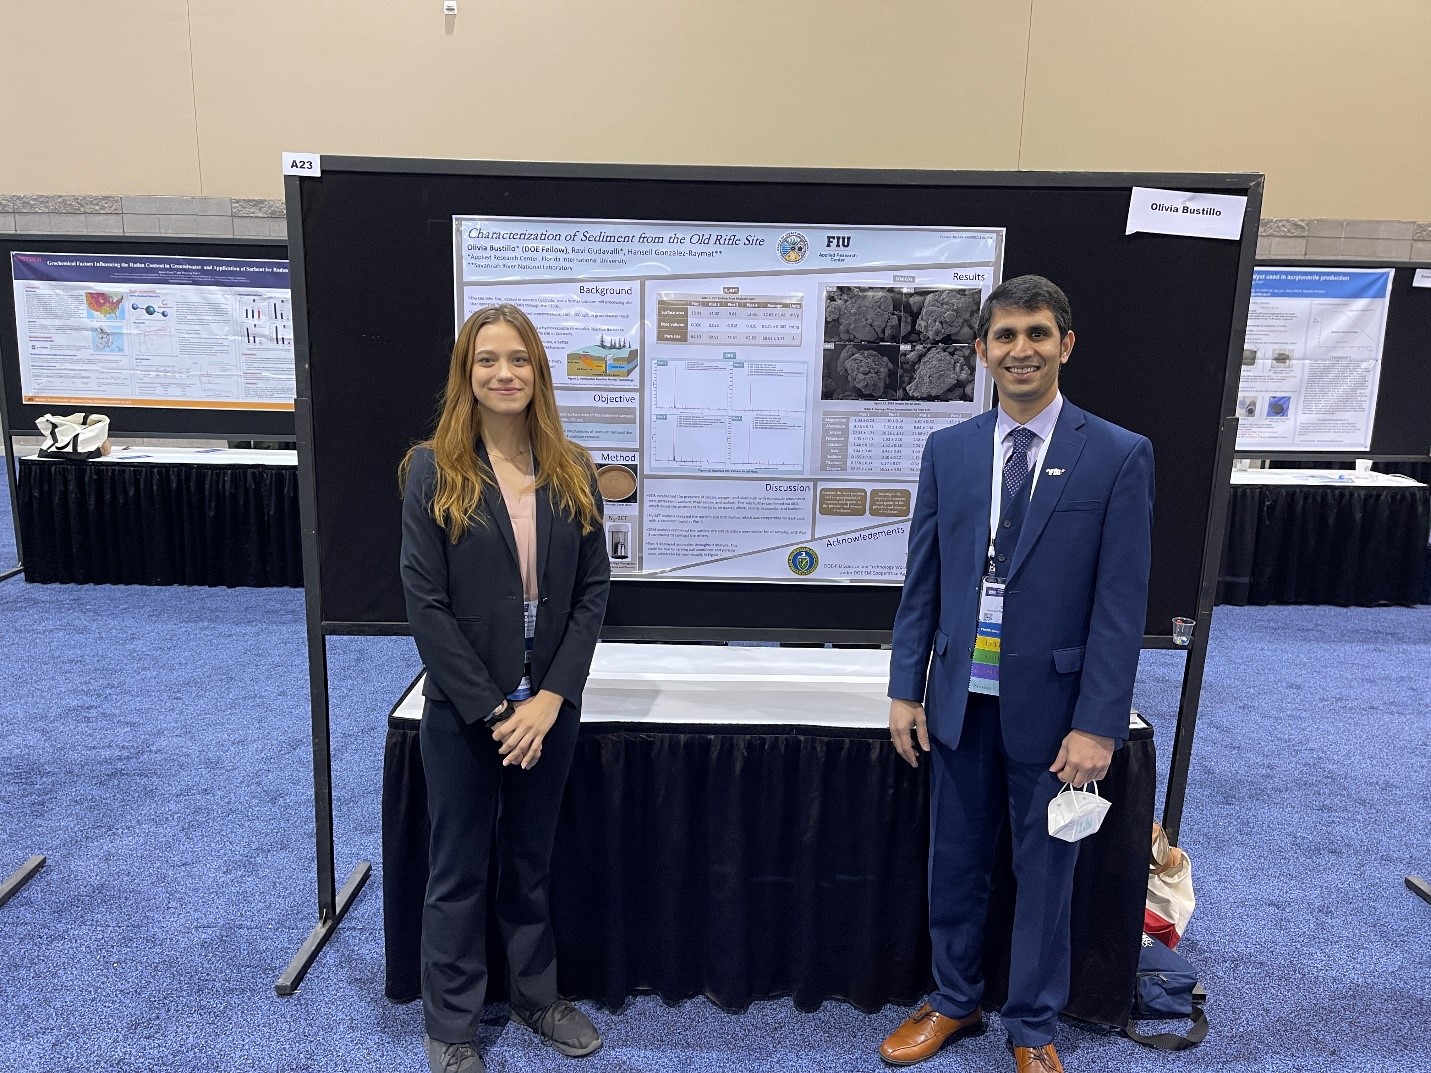 Ms. Olivia Bustillo (DOE-LM Fellow) and Dr. Ravi Gudavalli (Mentor) during the Student Poster Competition.